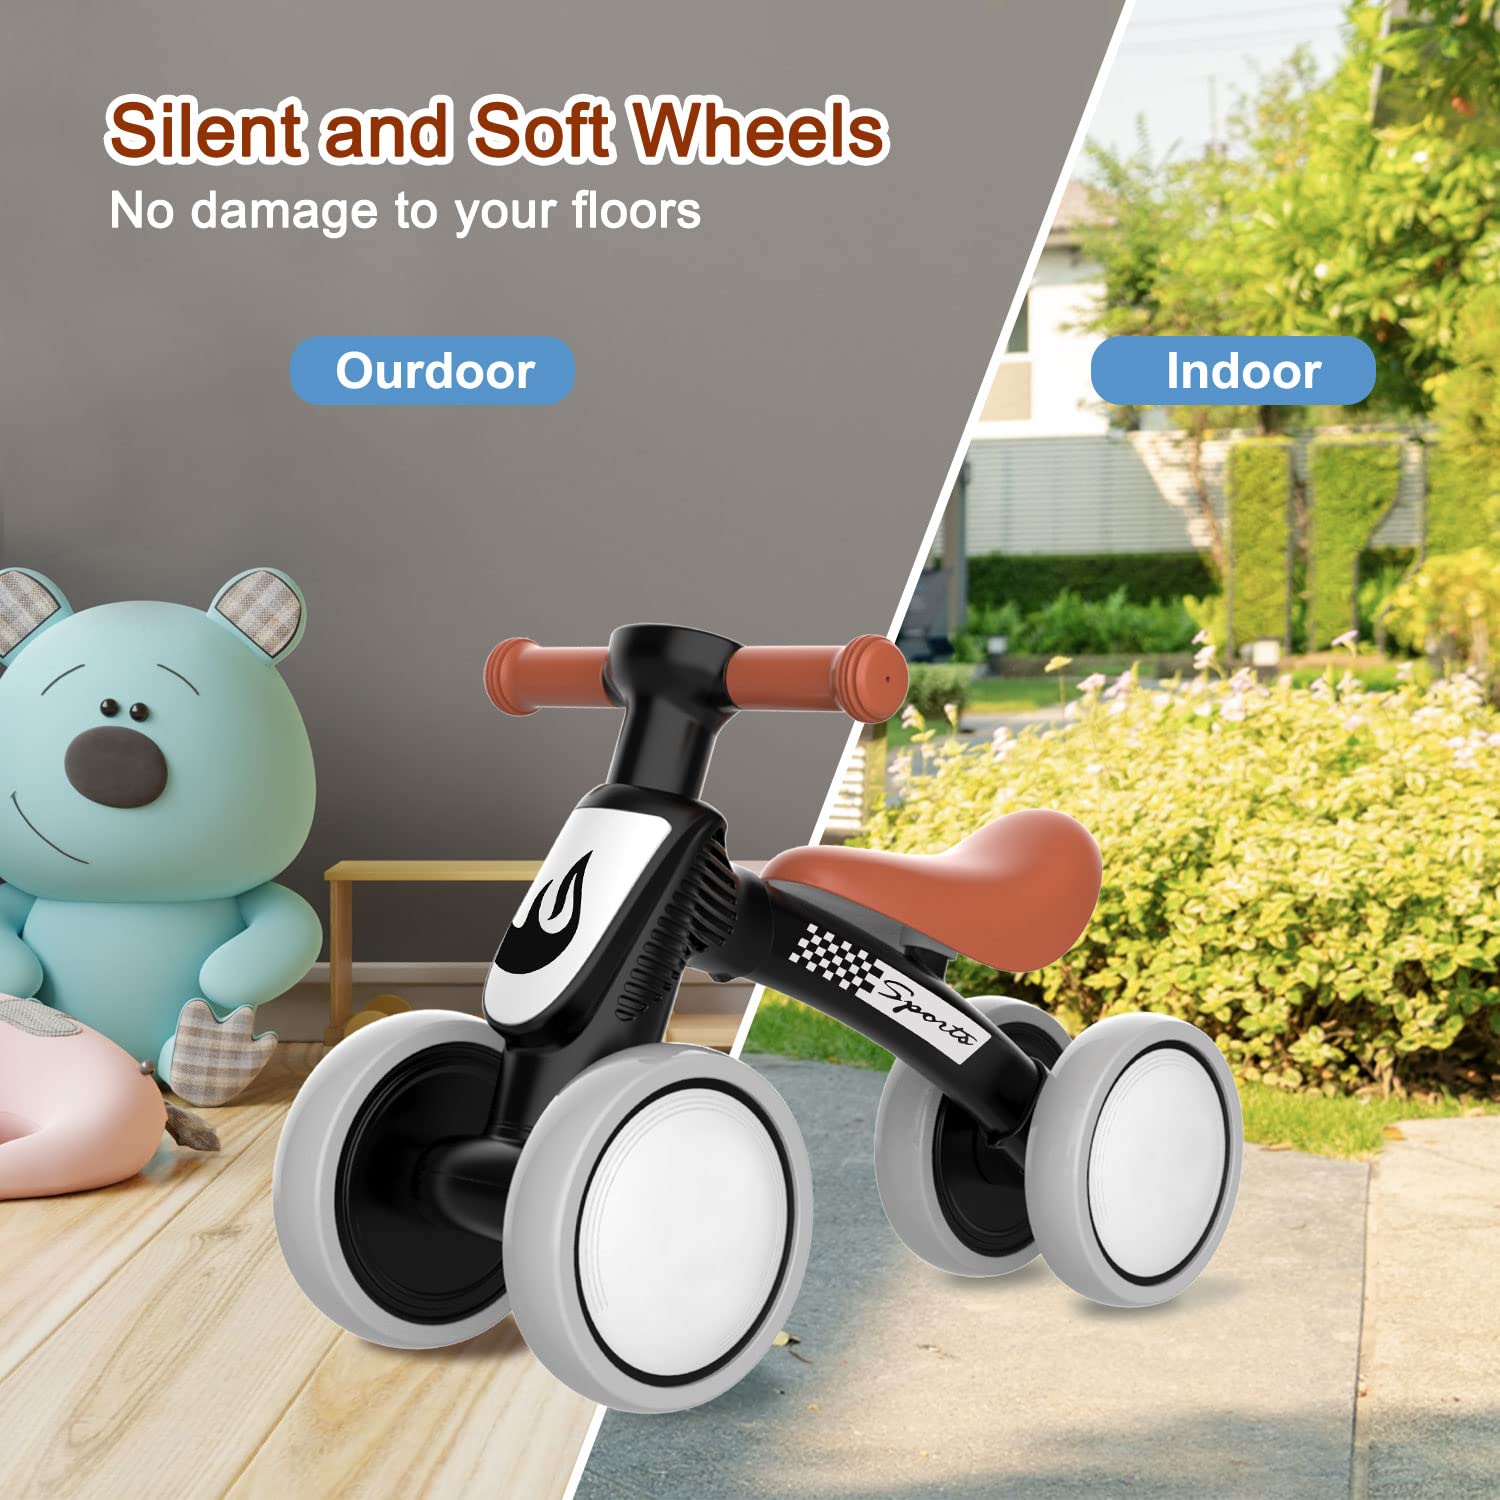 Baby Balance Bike Toys for 1 Year Old Boy Gifts, 10-36 Month Toddler Balance Bike, No Pedal 4 Silence Wheels & Soft Seat Pre-School First Riding Toys, One Year Old Boy Birthday Gifts.